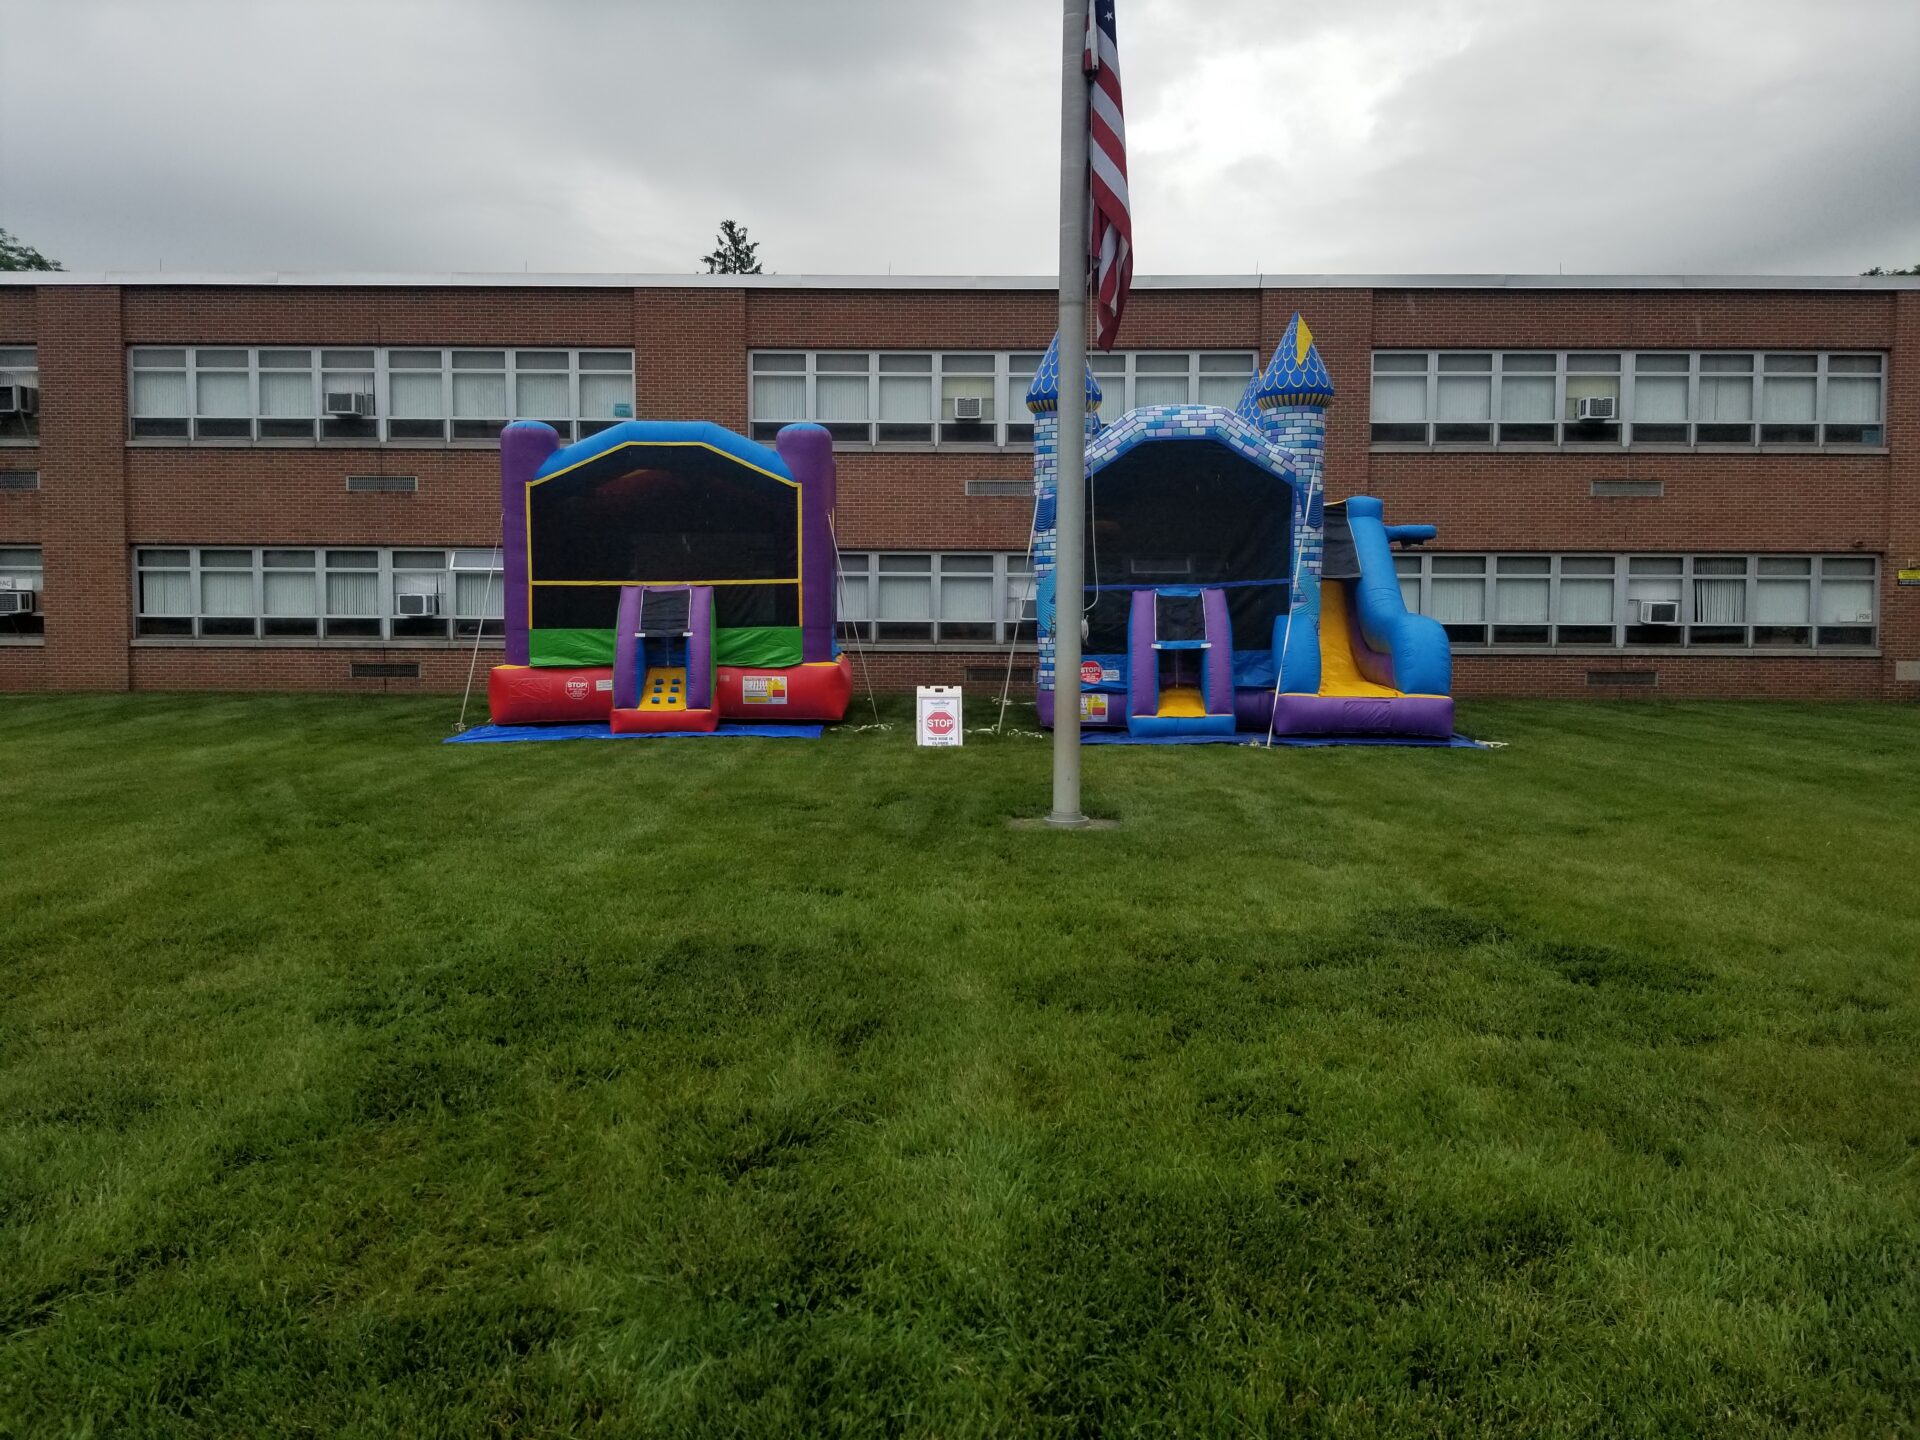 Two inflatable bouncers in front of a school building.